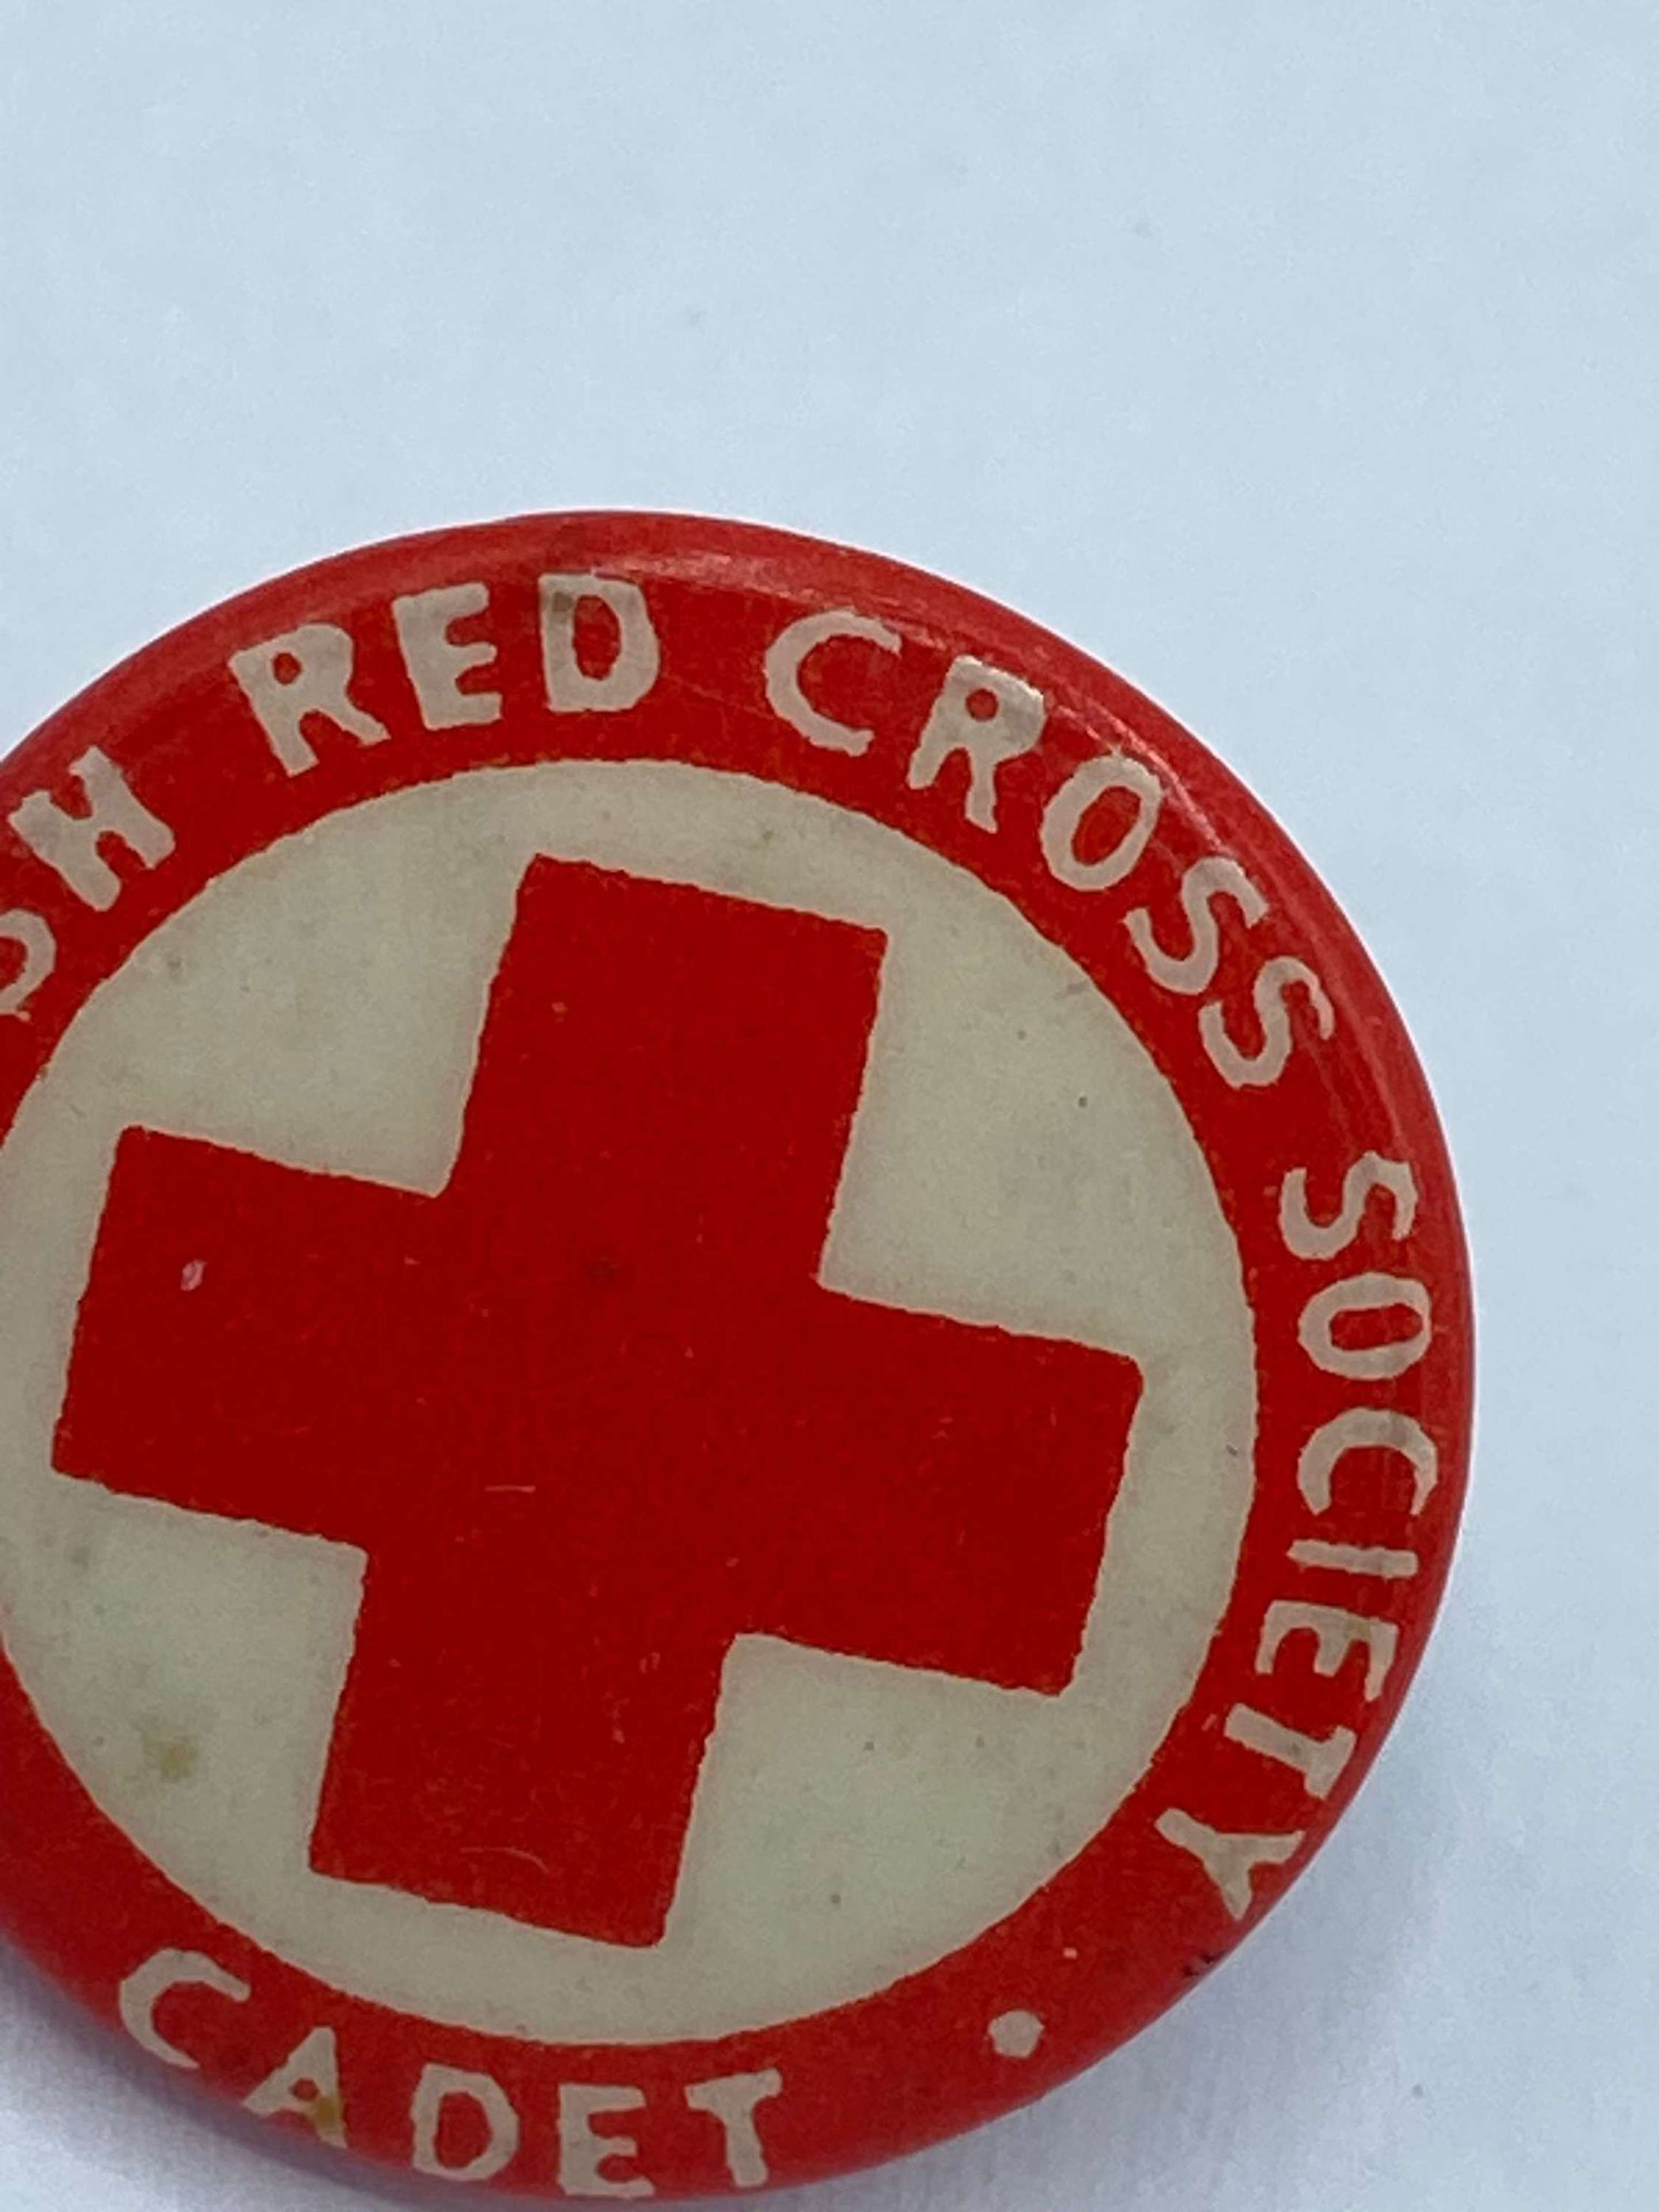 My Experience of Working With The Red Cross Society - iPleaders